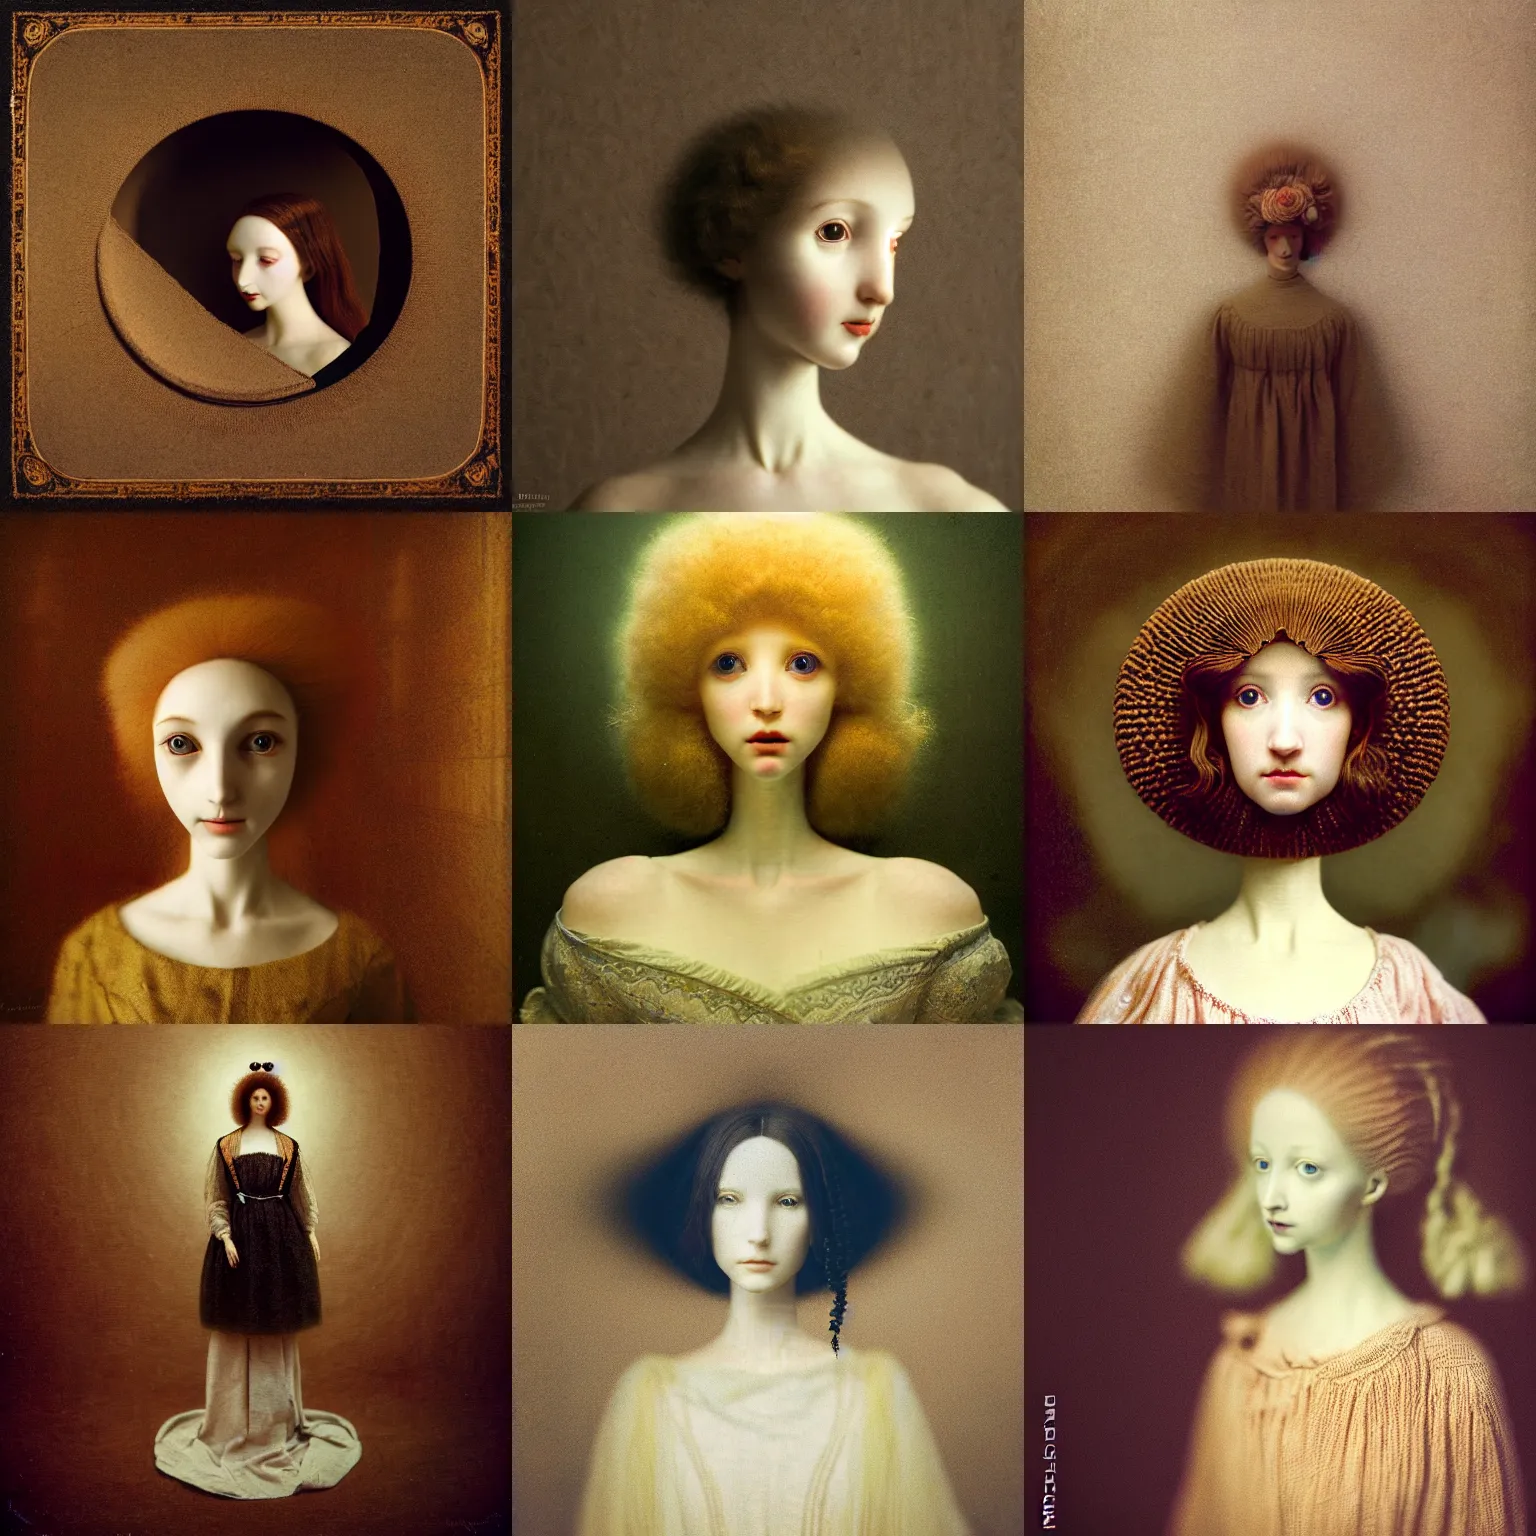 Prompt: circular fisheye photo portrait of a beautiful female jointed art doll, gopro, 8 mm wide angle lens, distorted perspective, by agostino arrivabene, by fernand khnopff, by rembrandt, rendered in octane, photography, photorealistic, surreal, crying, mysterious